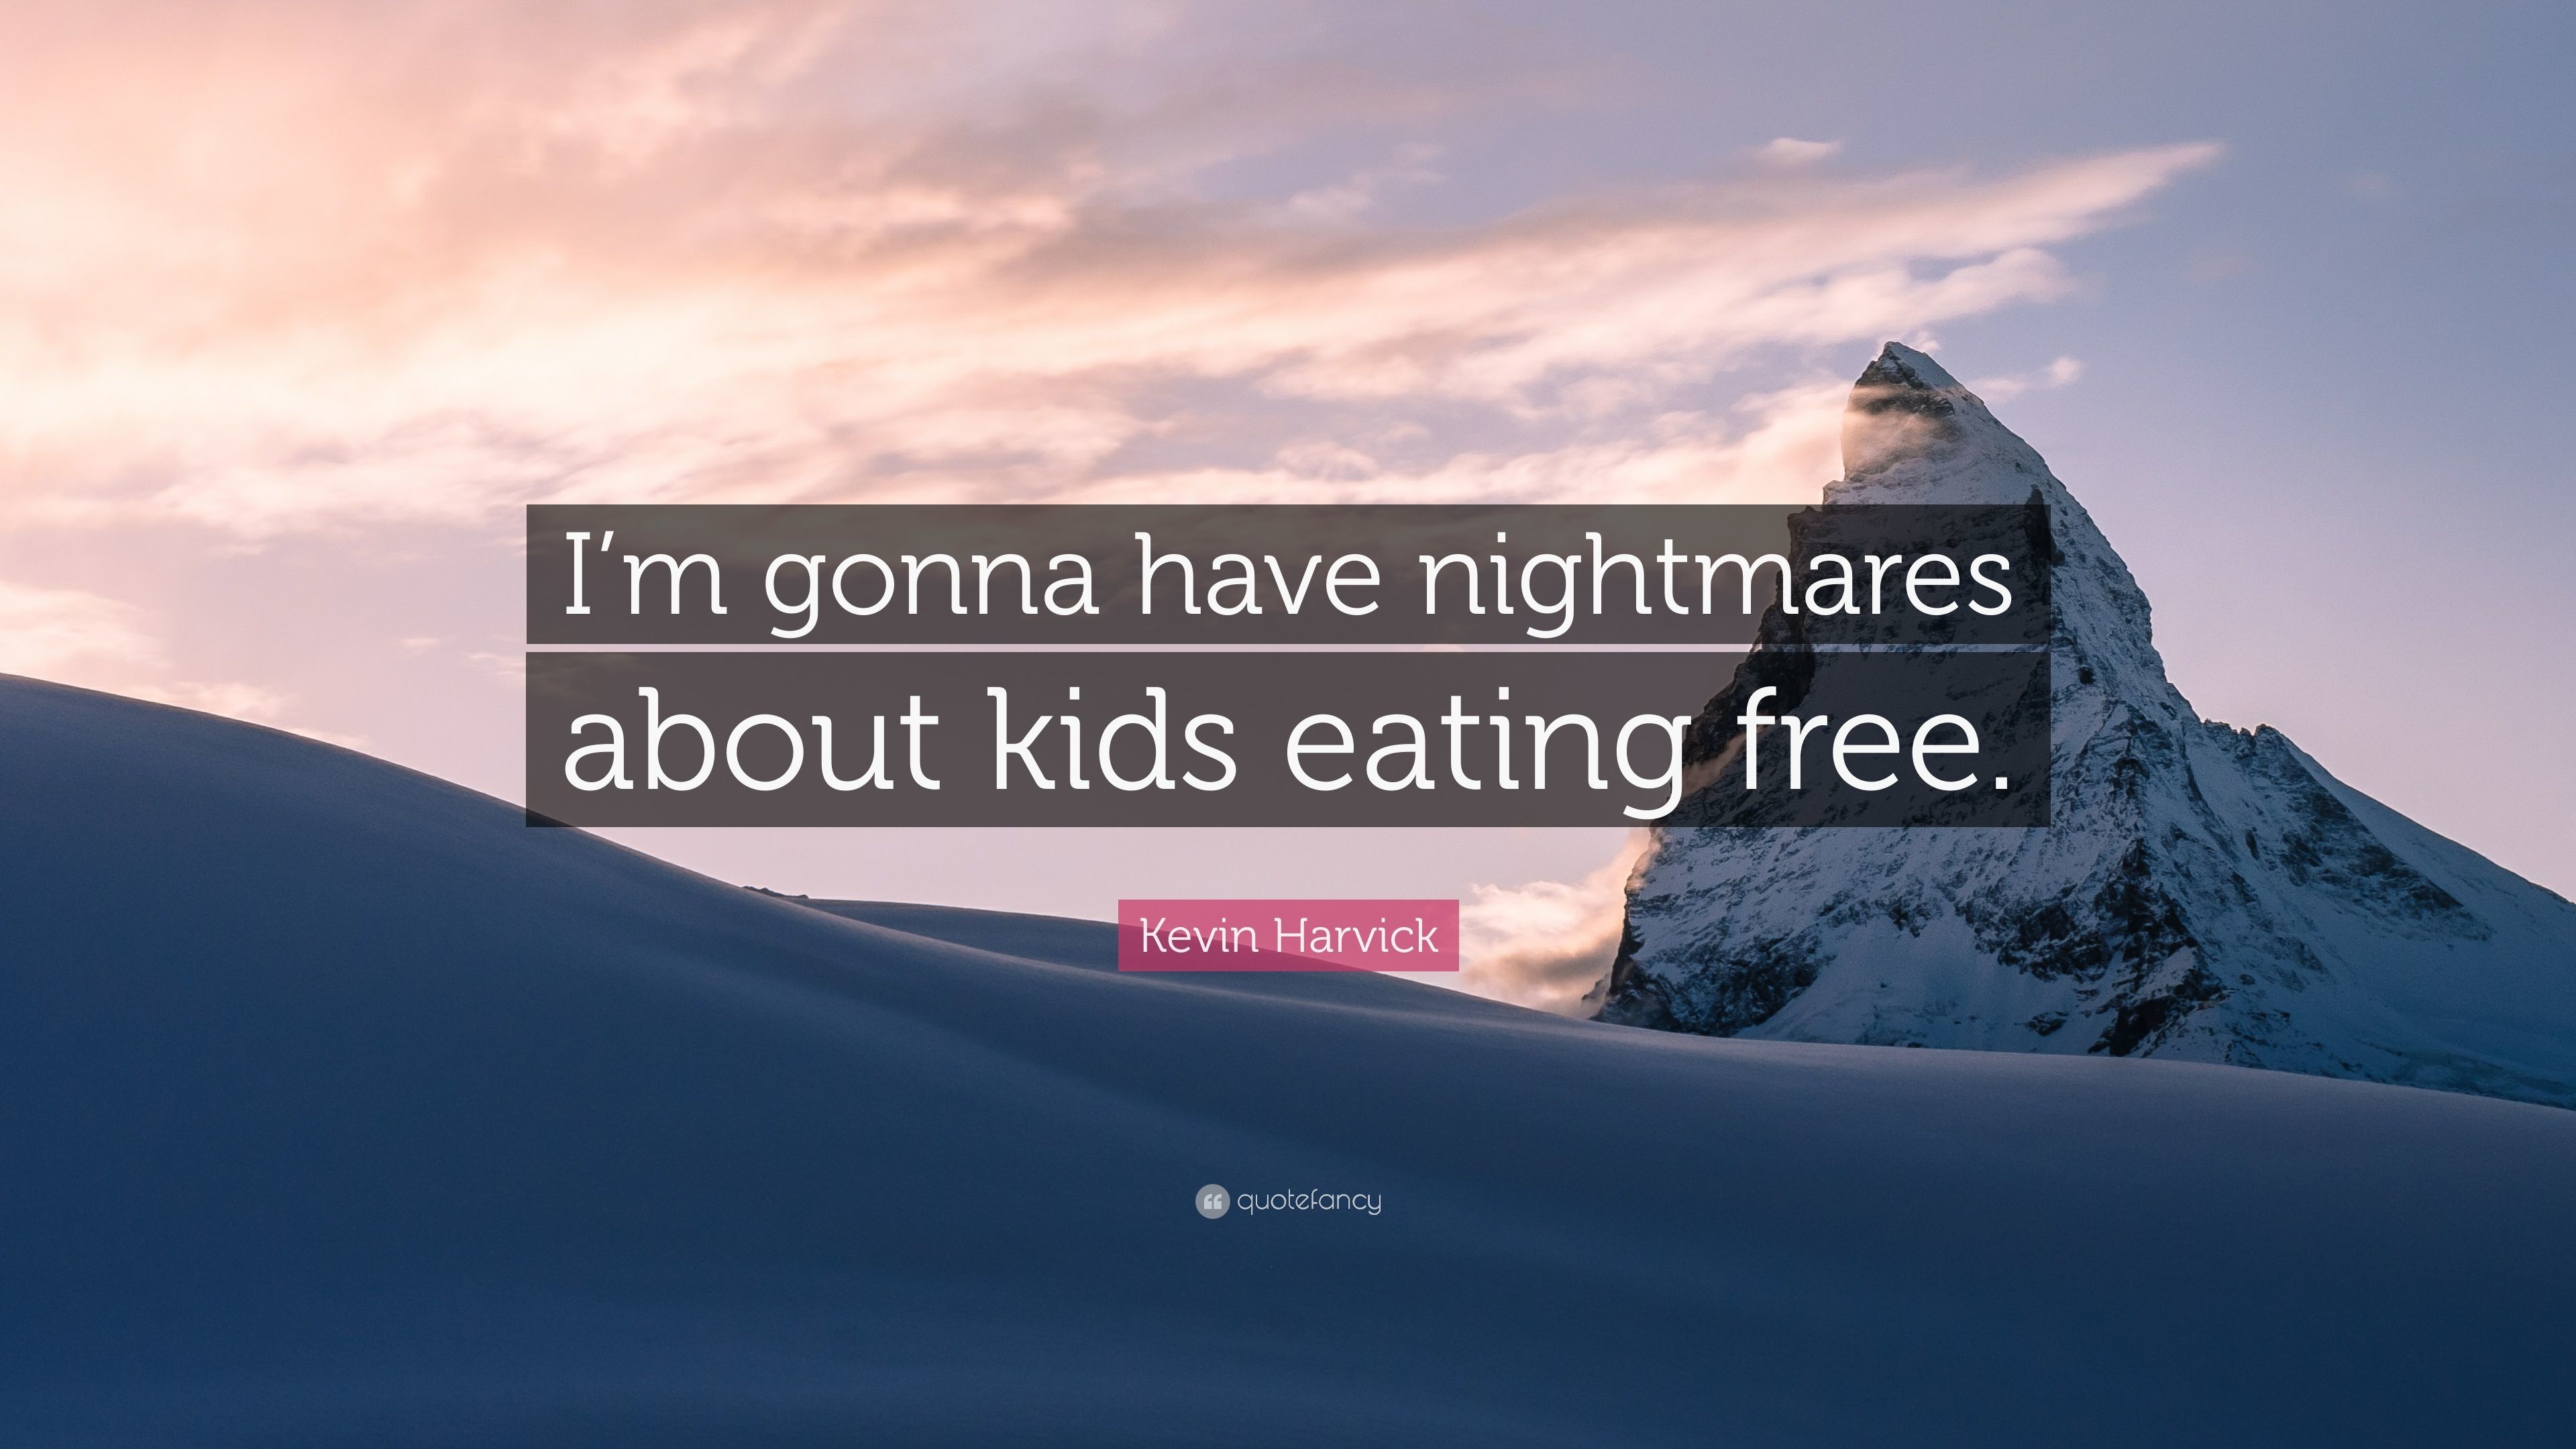 3840x2160 Kevin Harvick Quote: “I'm gonna have nightmares about kids eating free.